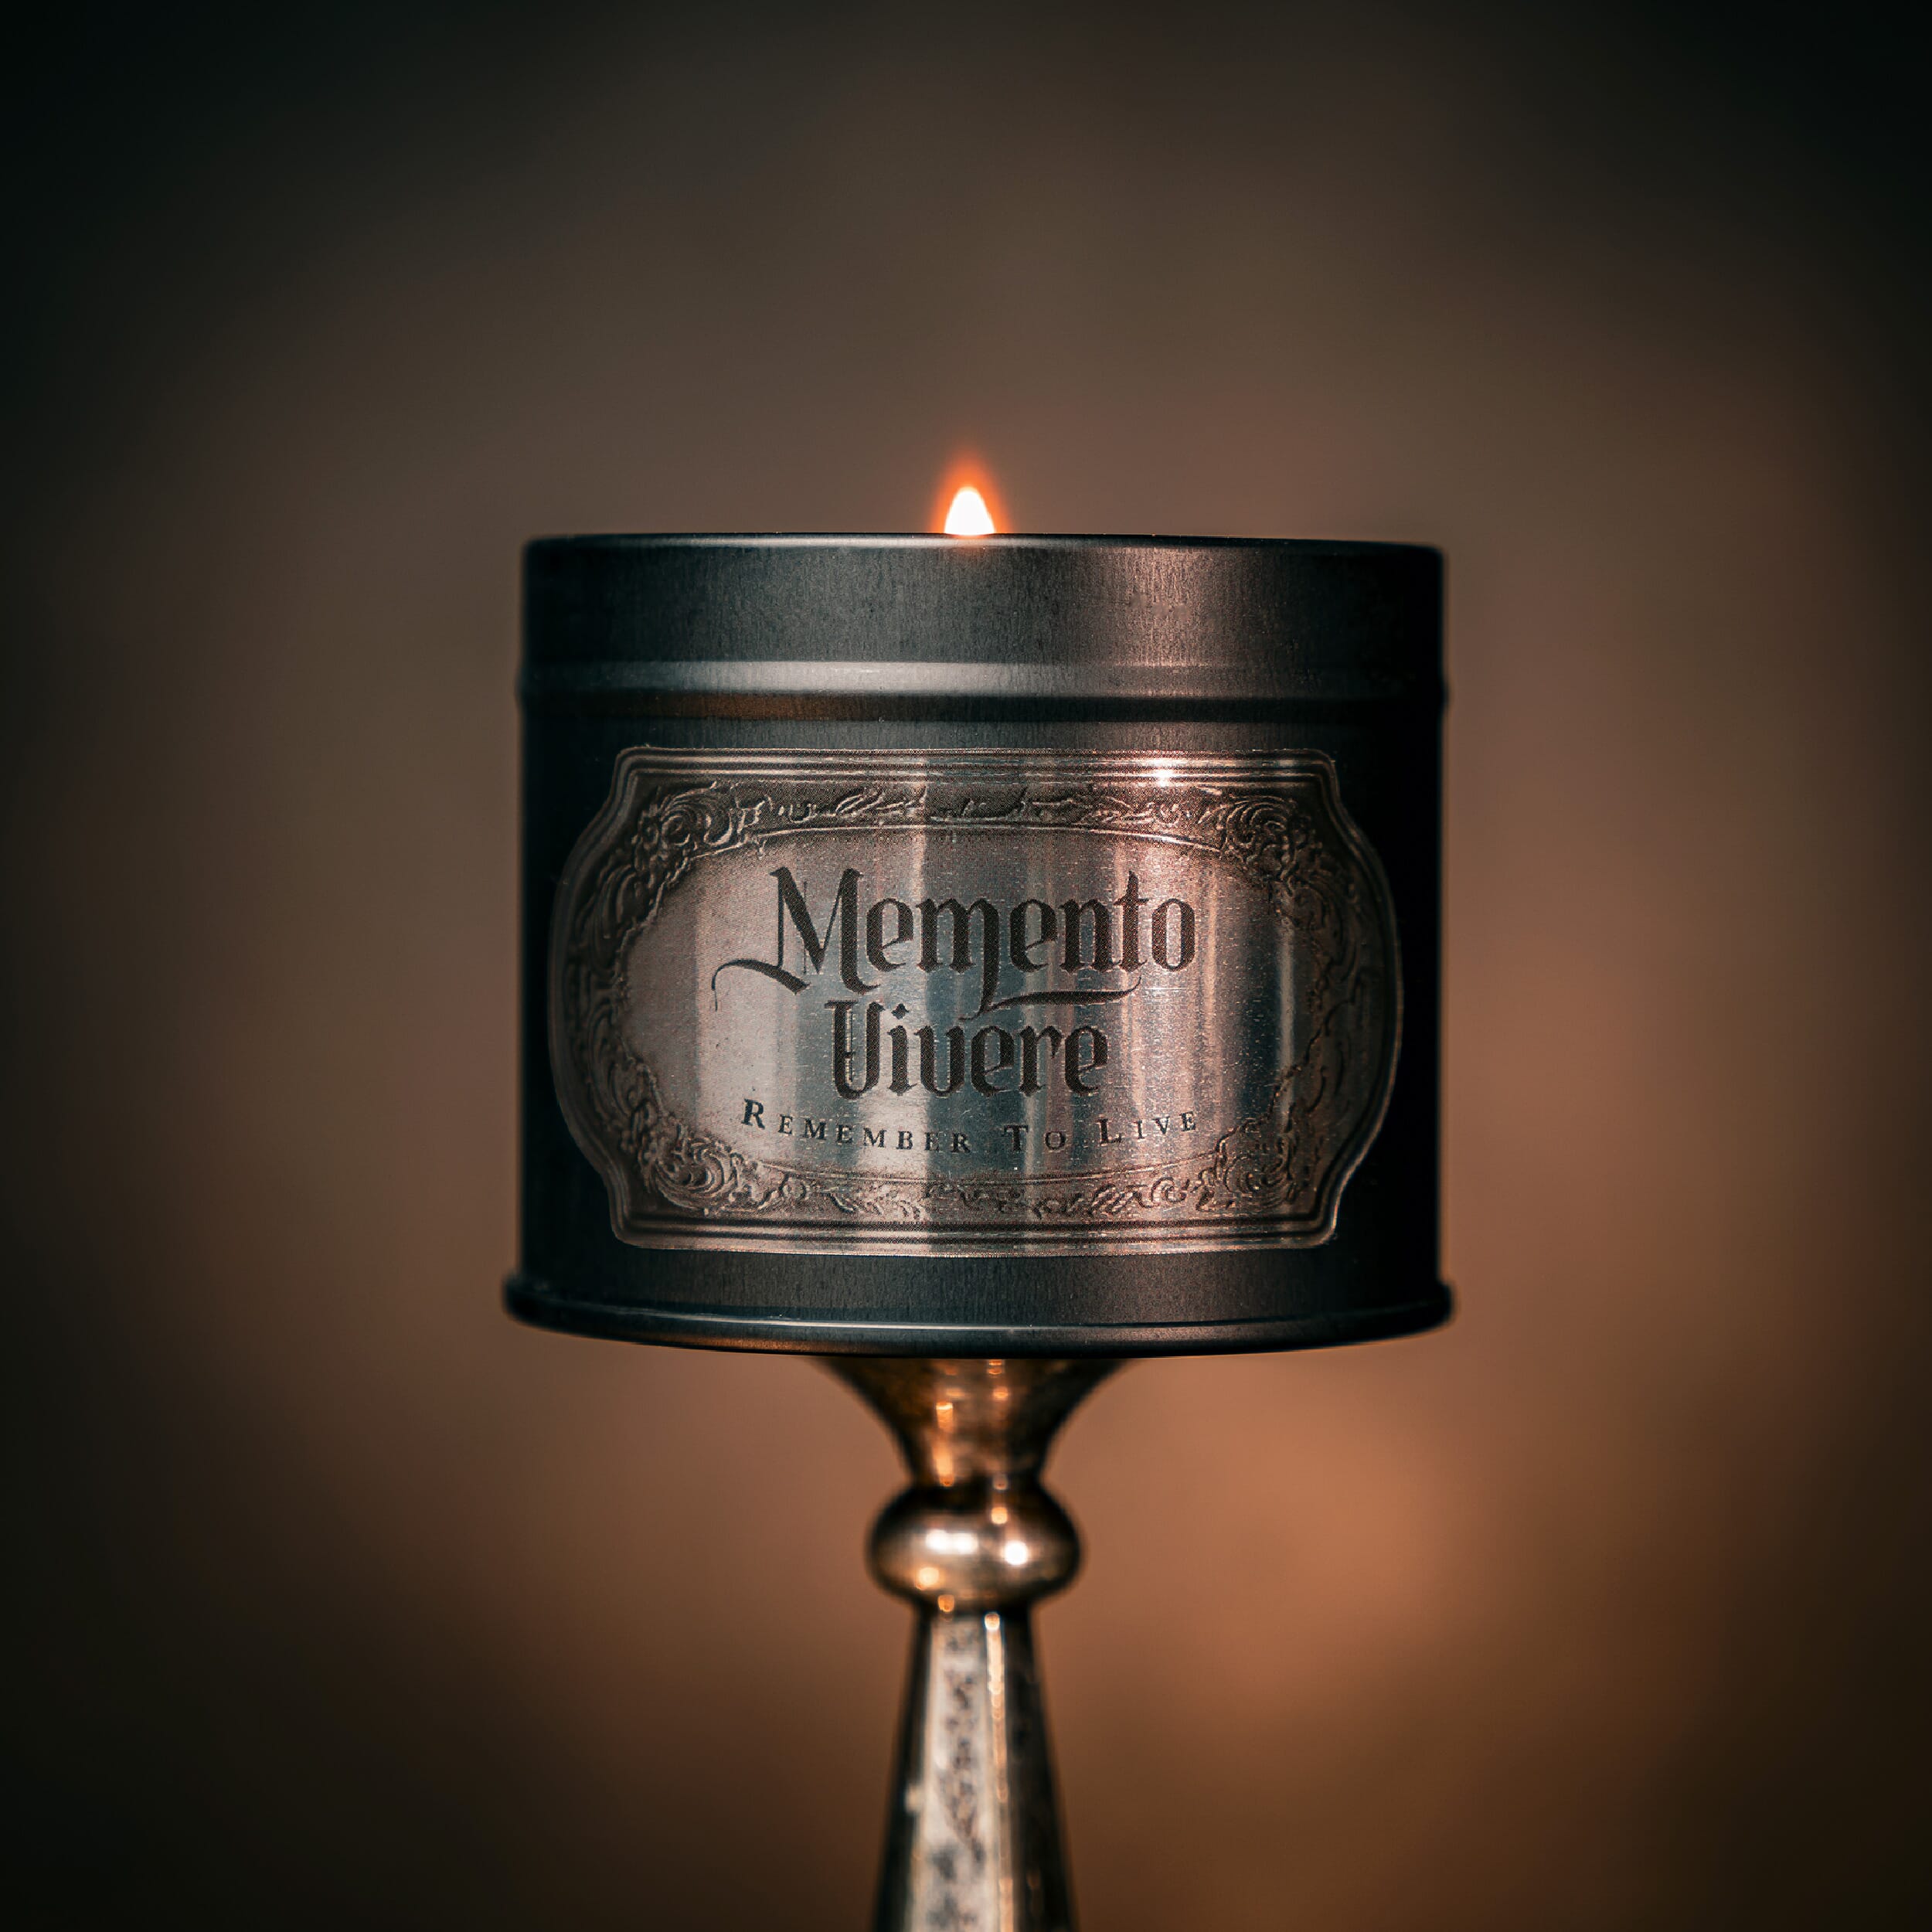 memento vivere jar candle gothic candle the blackened teeth - gothic decor